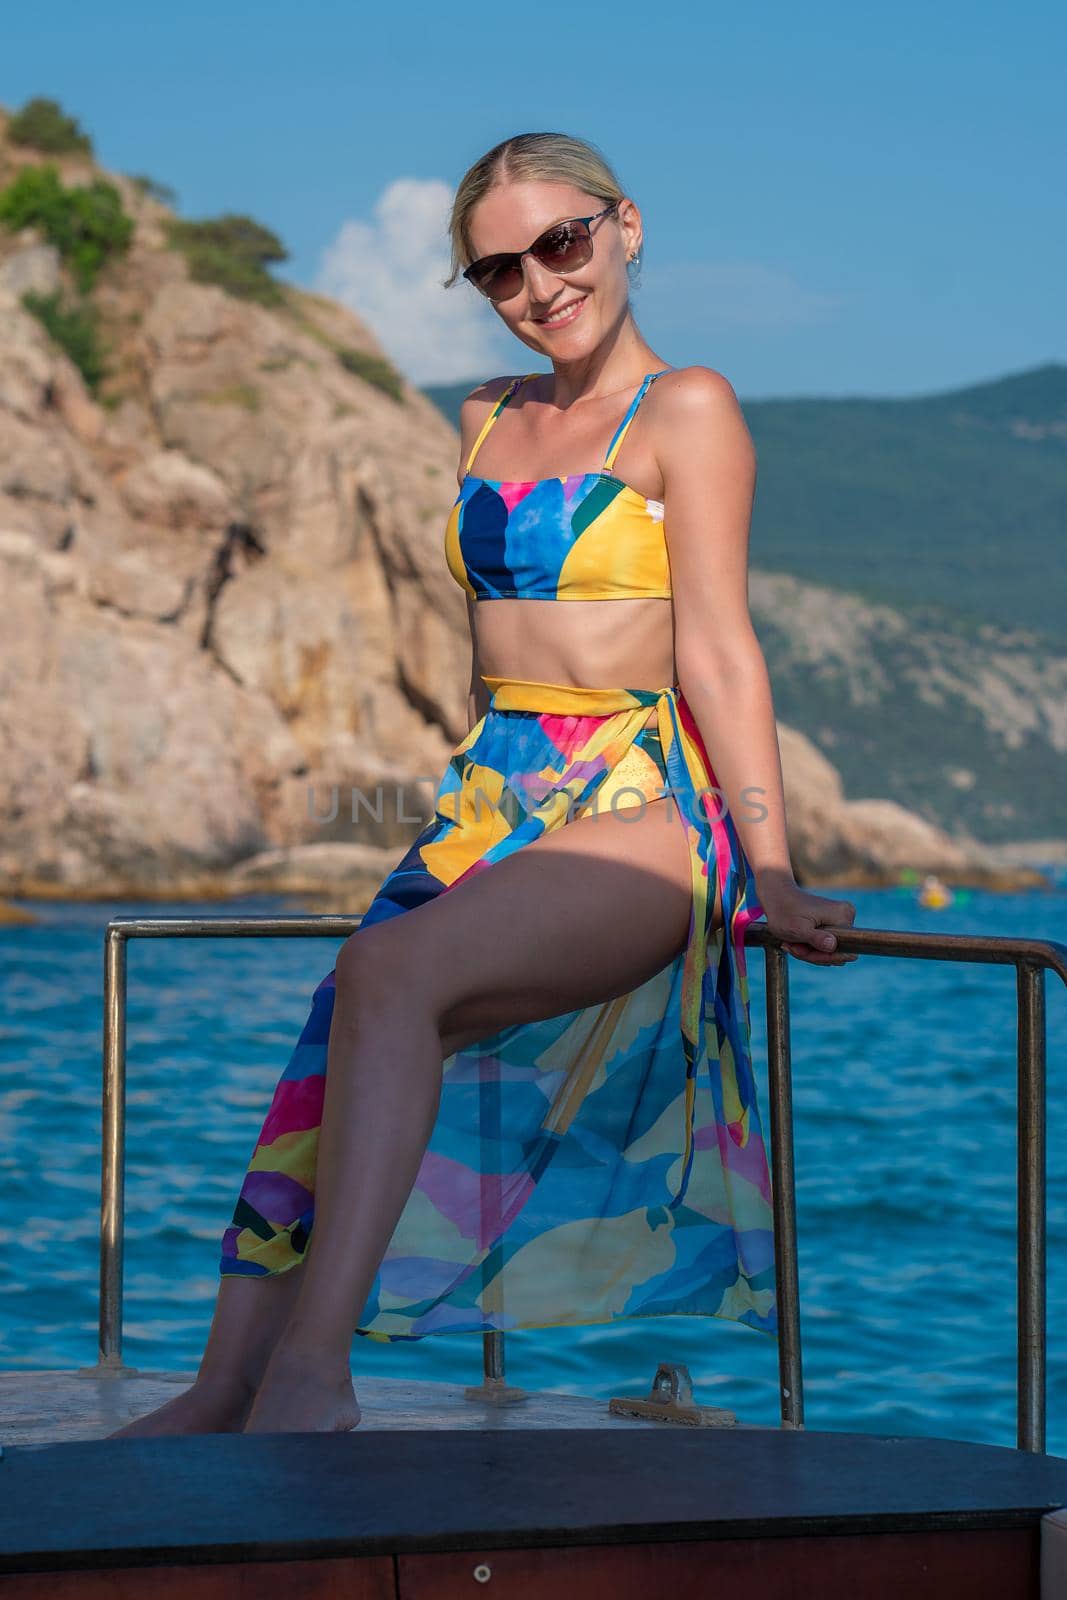 Swimsuit glasses dress sea female yacht vacation beautiful model background, concept sky young in boat from leisure ocean, tourism relaxation. Glamour attractive bikini, by 89167702191